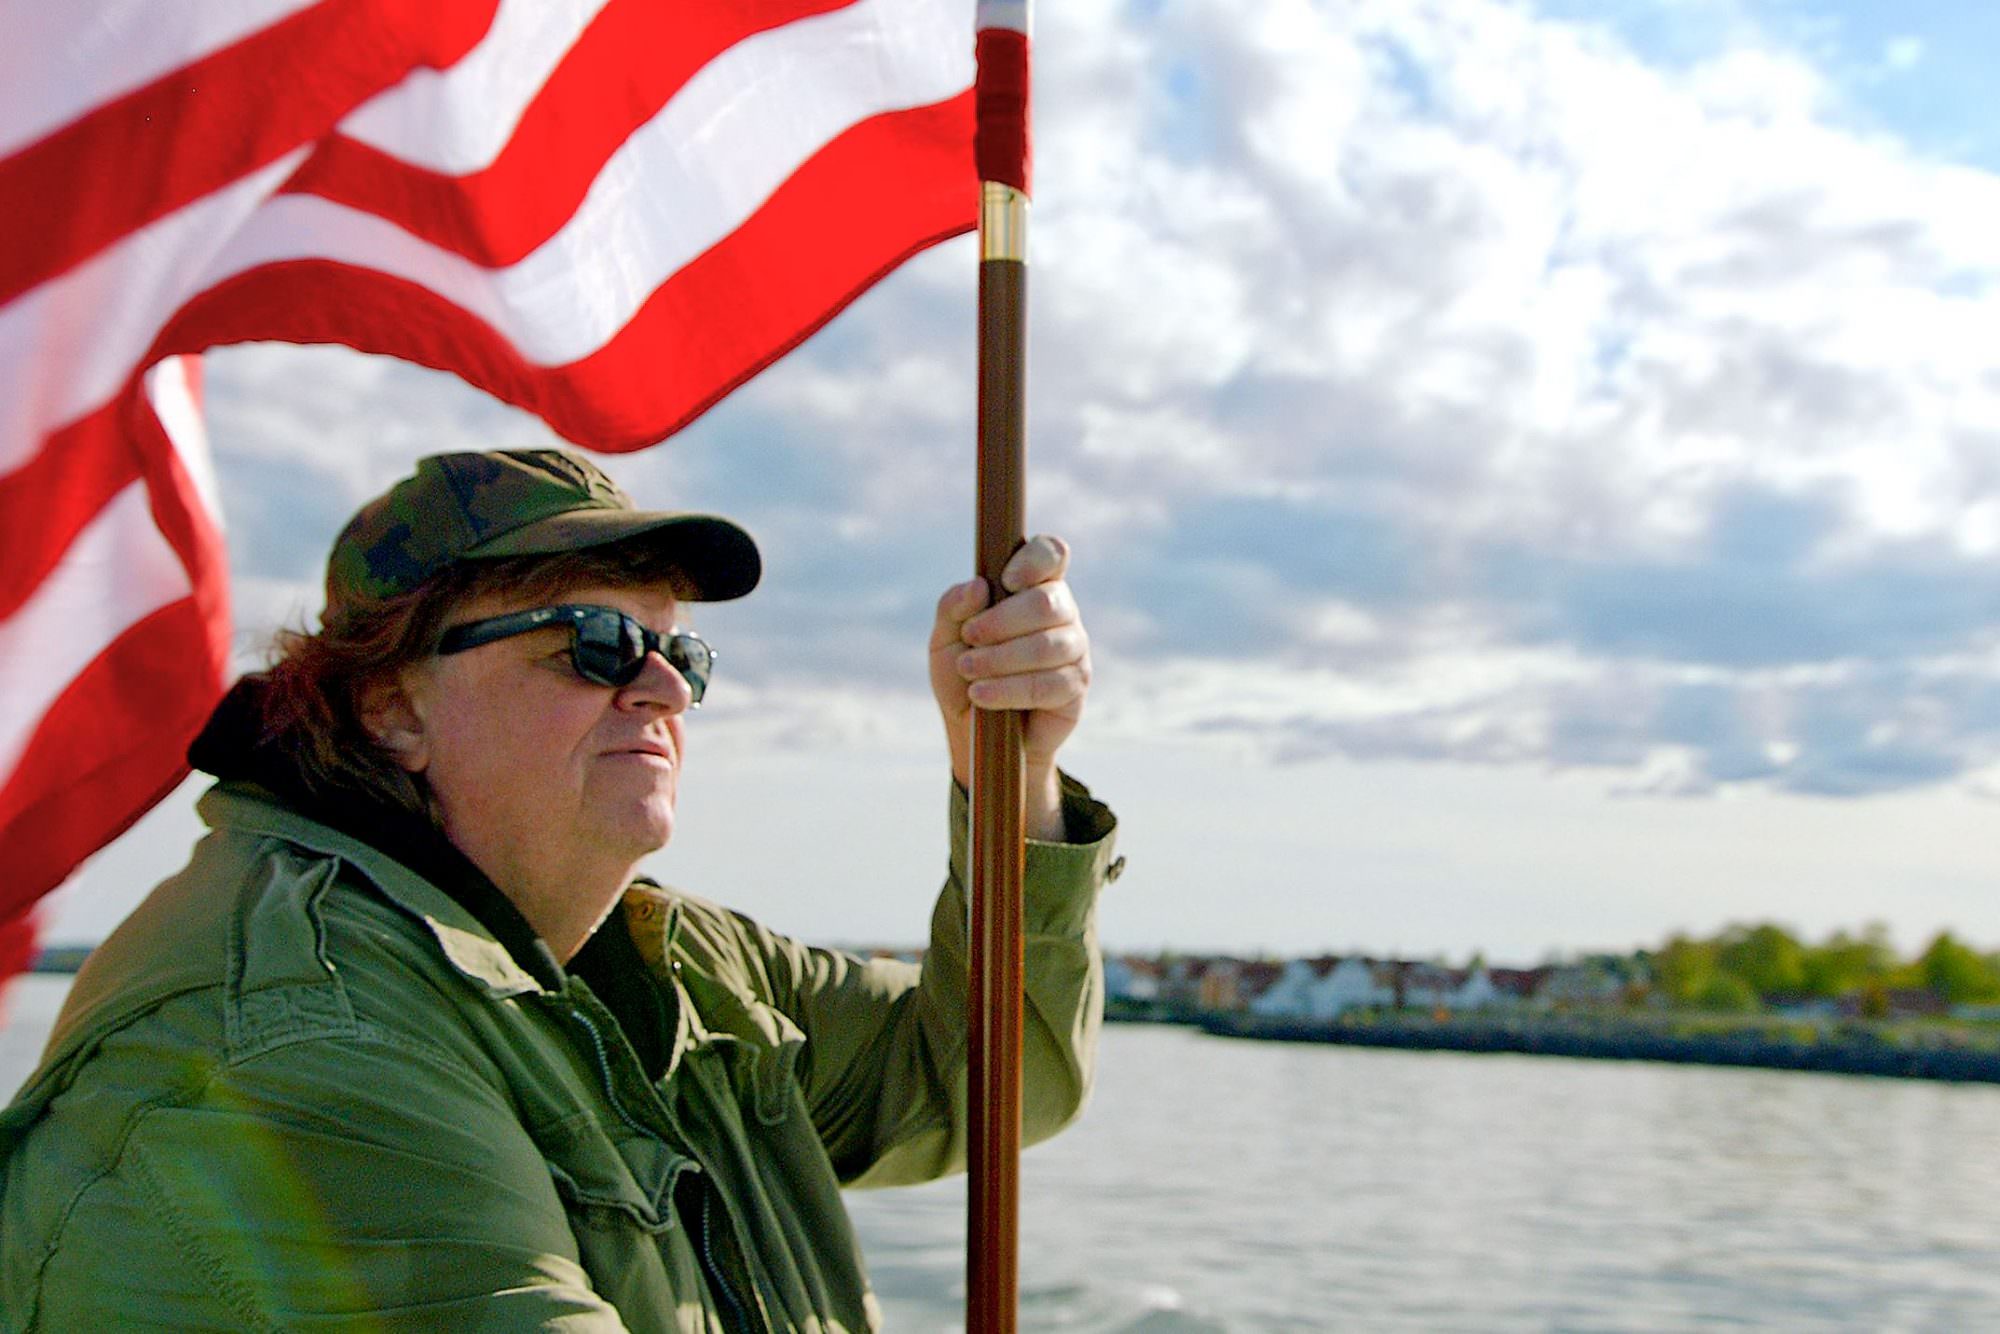 Micheal Moore Where to Invade Next